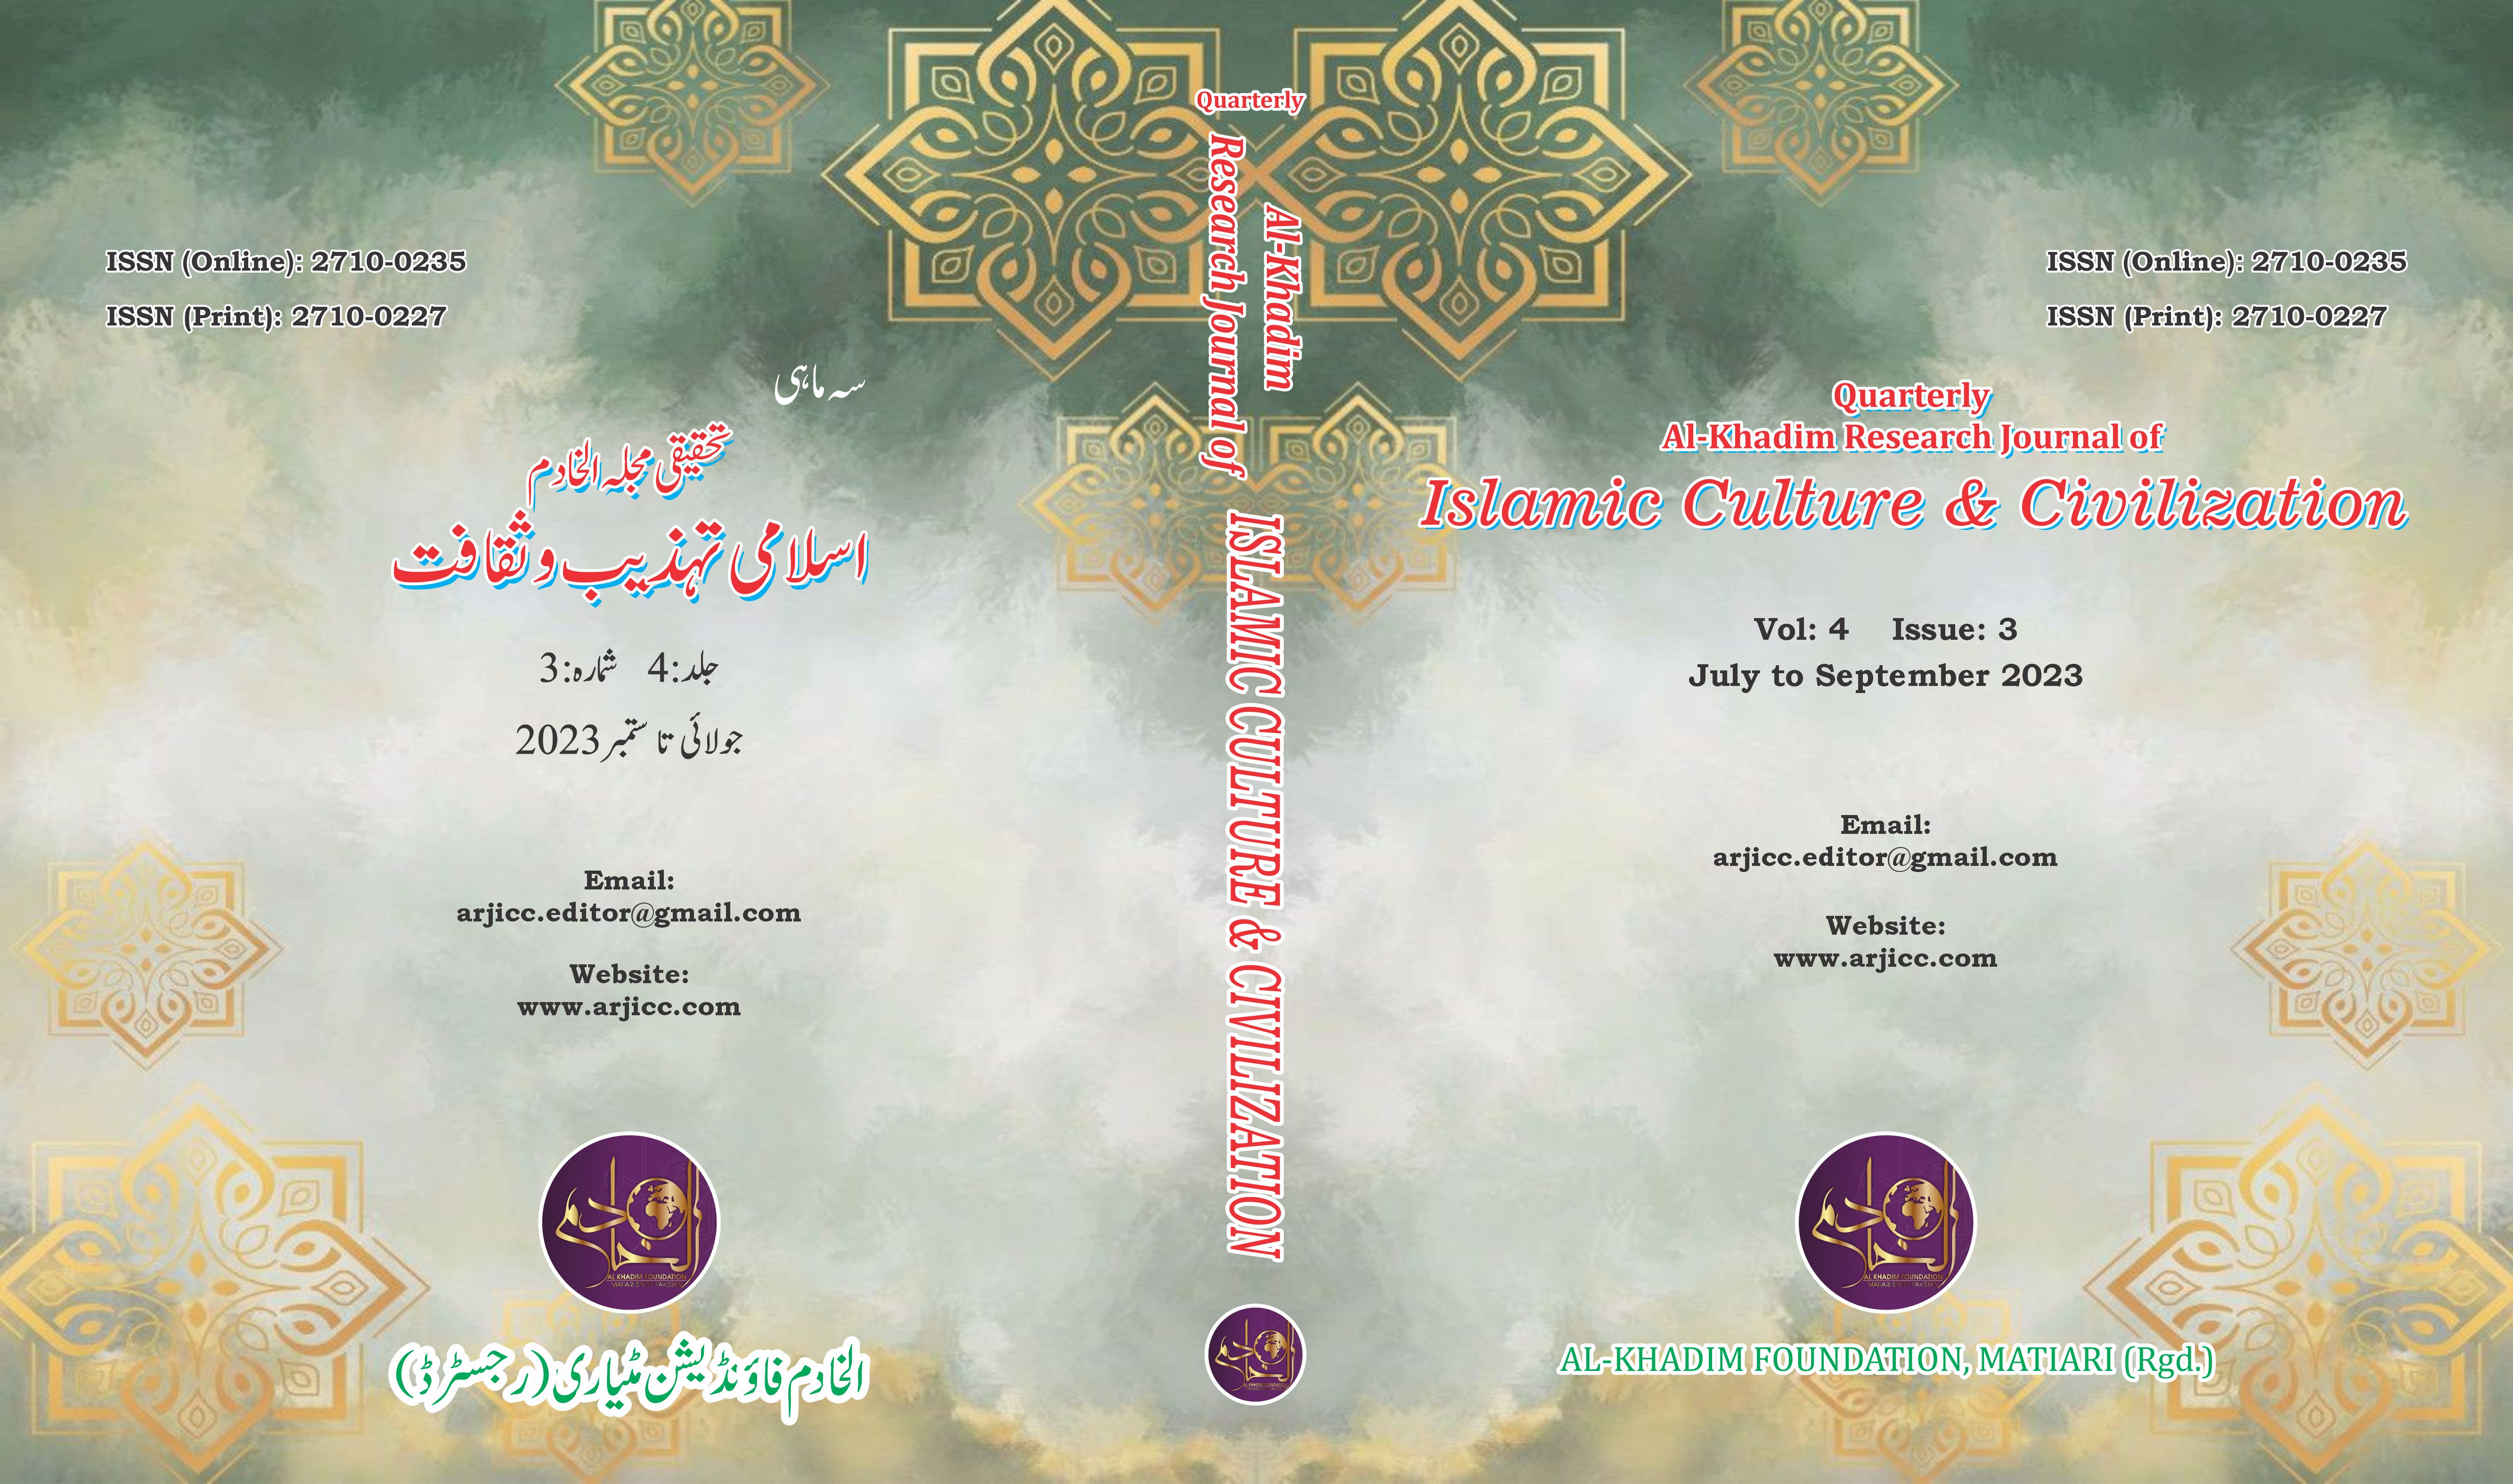 					View Vol. 4 No. 3 (2023): Al Khadim Research Journal of Islamic Culture and Civilization (July to September 2023)
				